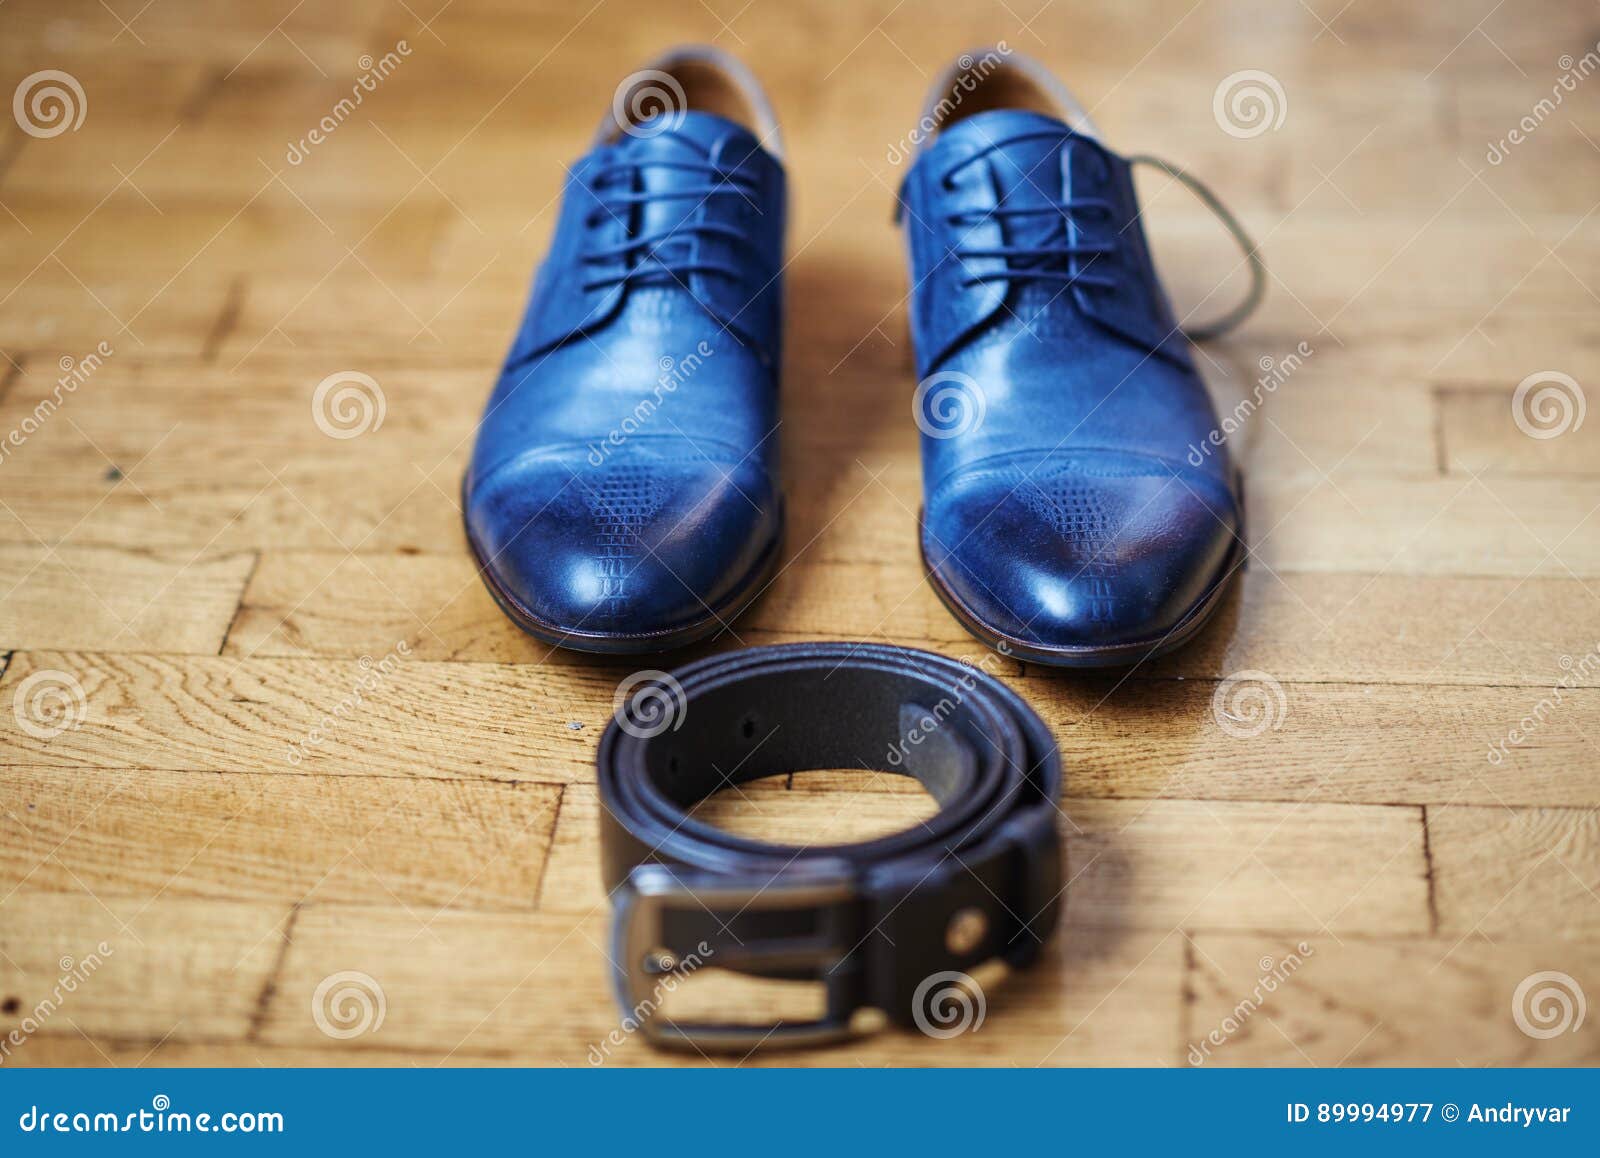 Men`s shoes and glasses stock image. Image of elegance - 89994977